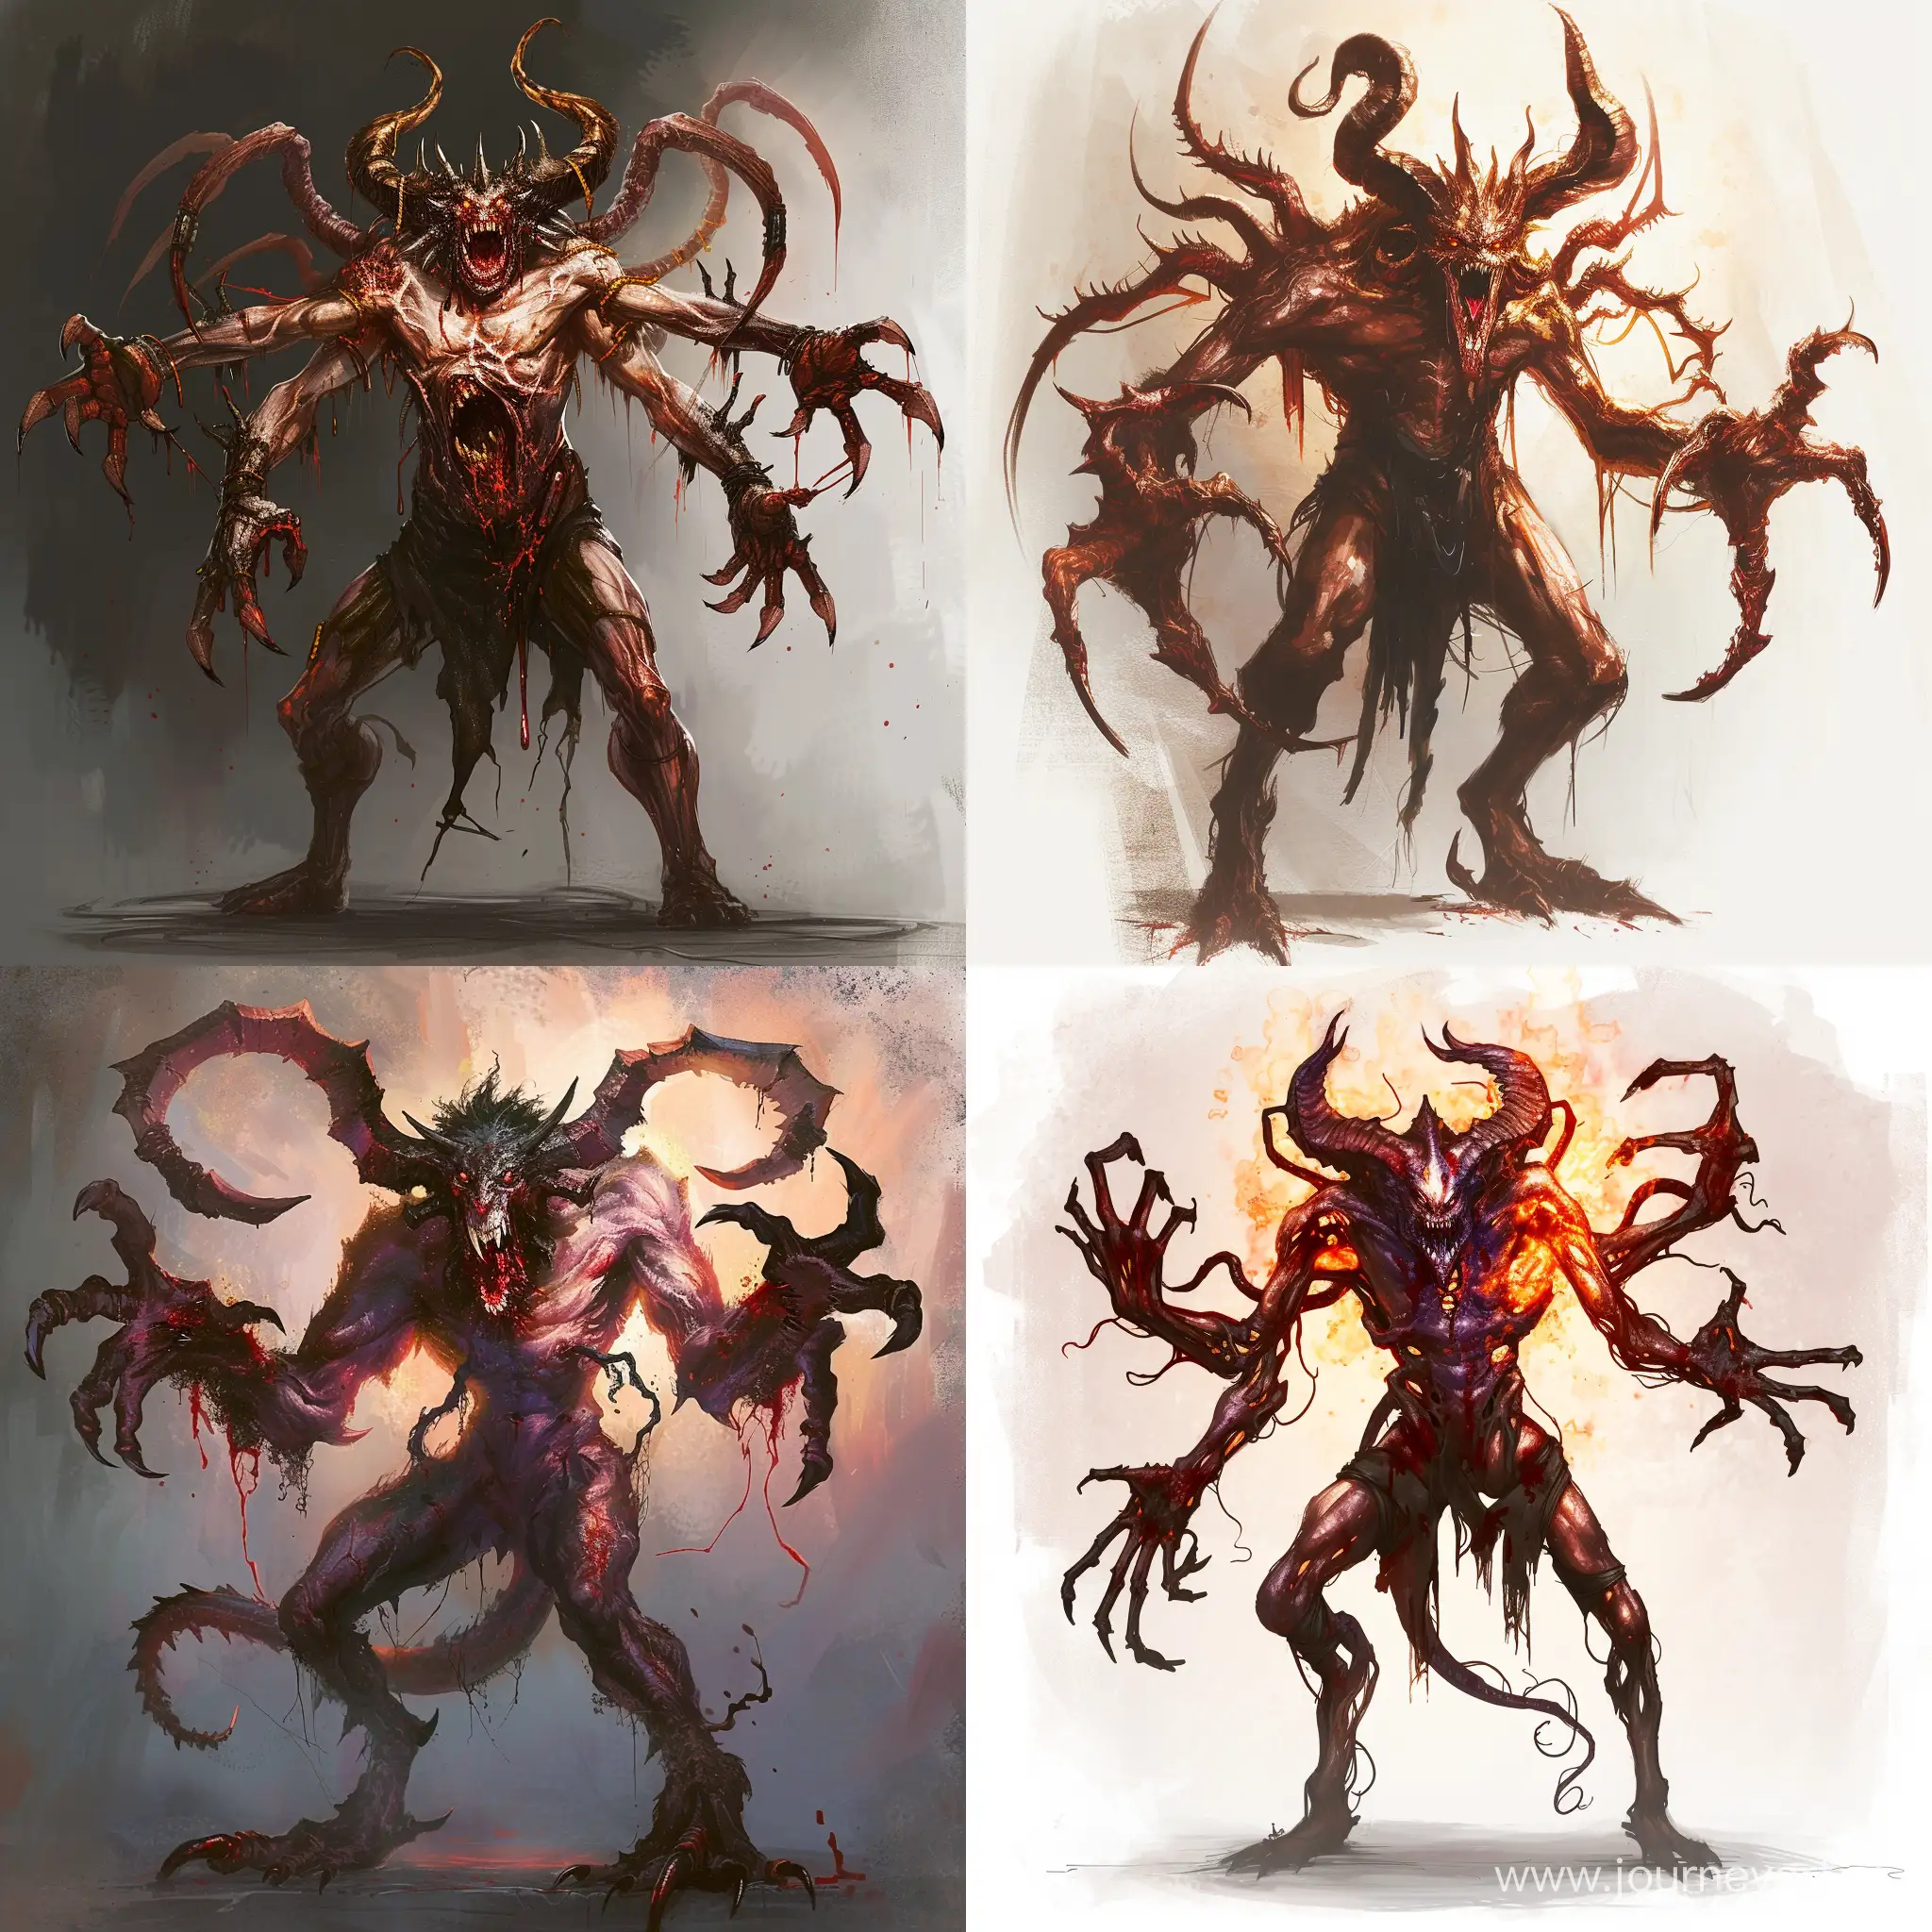 Realistic-4MeterTall-Aggressive-Demon-with-Multiple-Arms-for-Game-Art